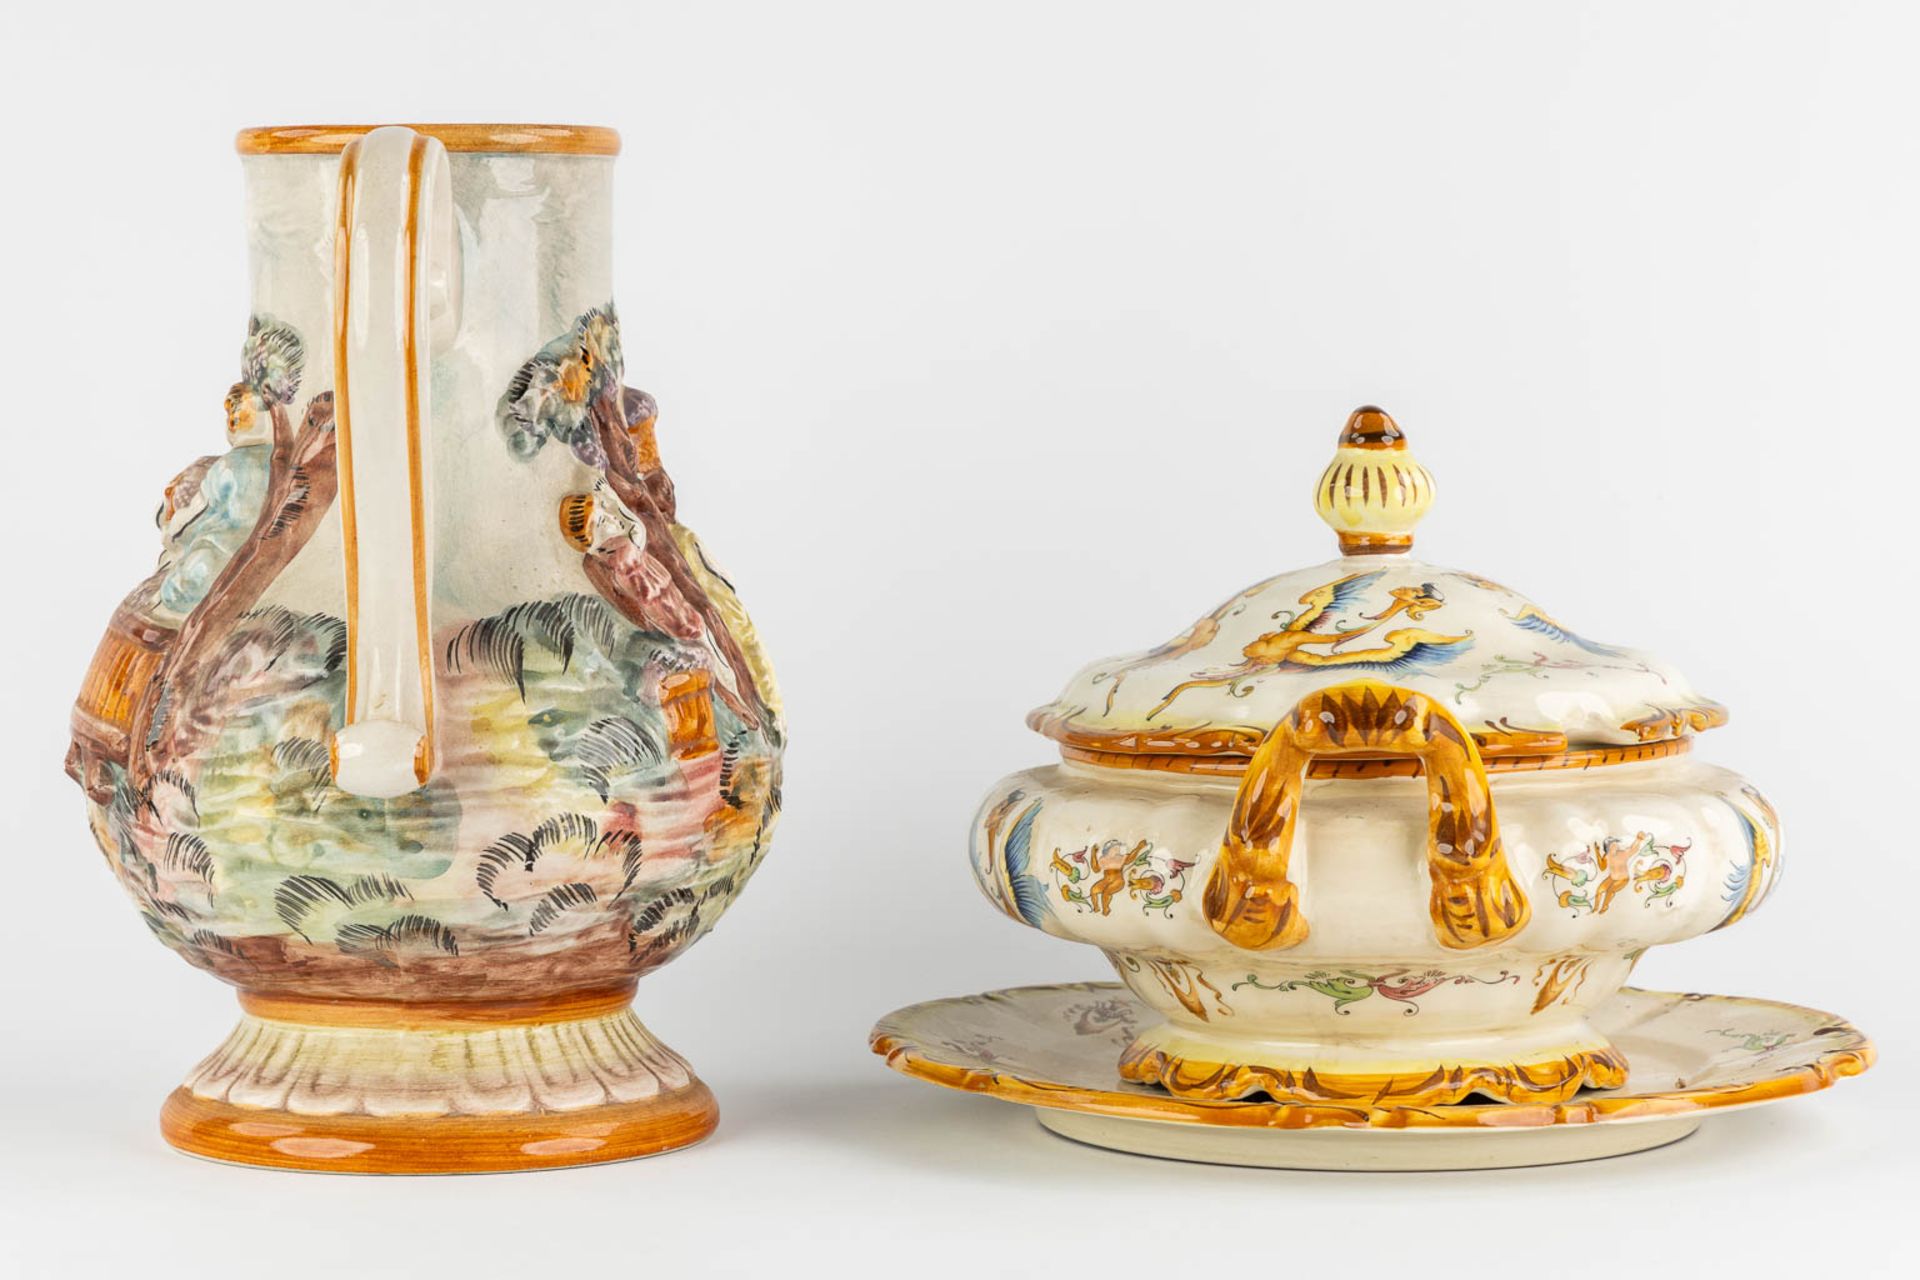 Capodimonte, 5 large pitchers, vases and urns. Glazed faience. (L:23 x W:31 x H:50 cm) - Image 16 of 31